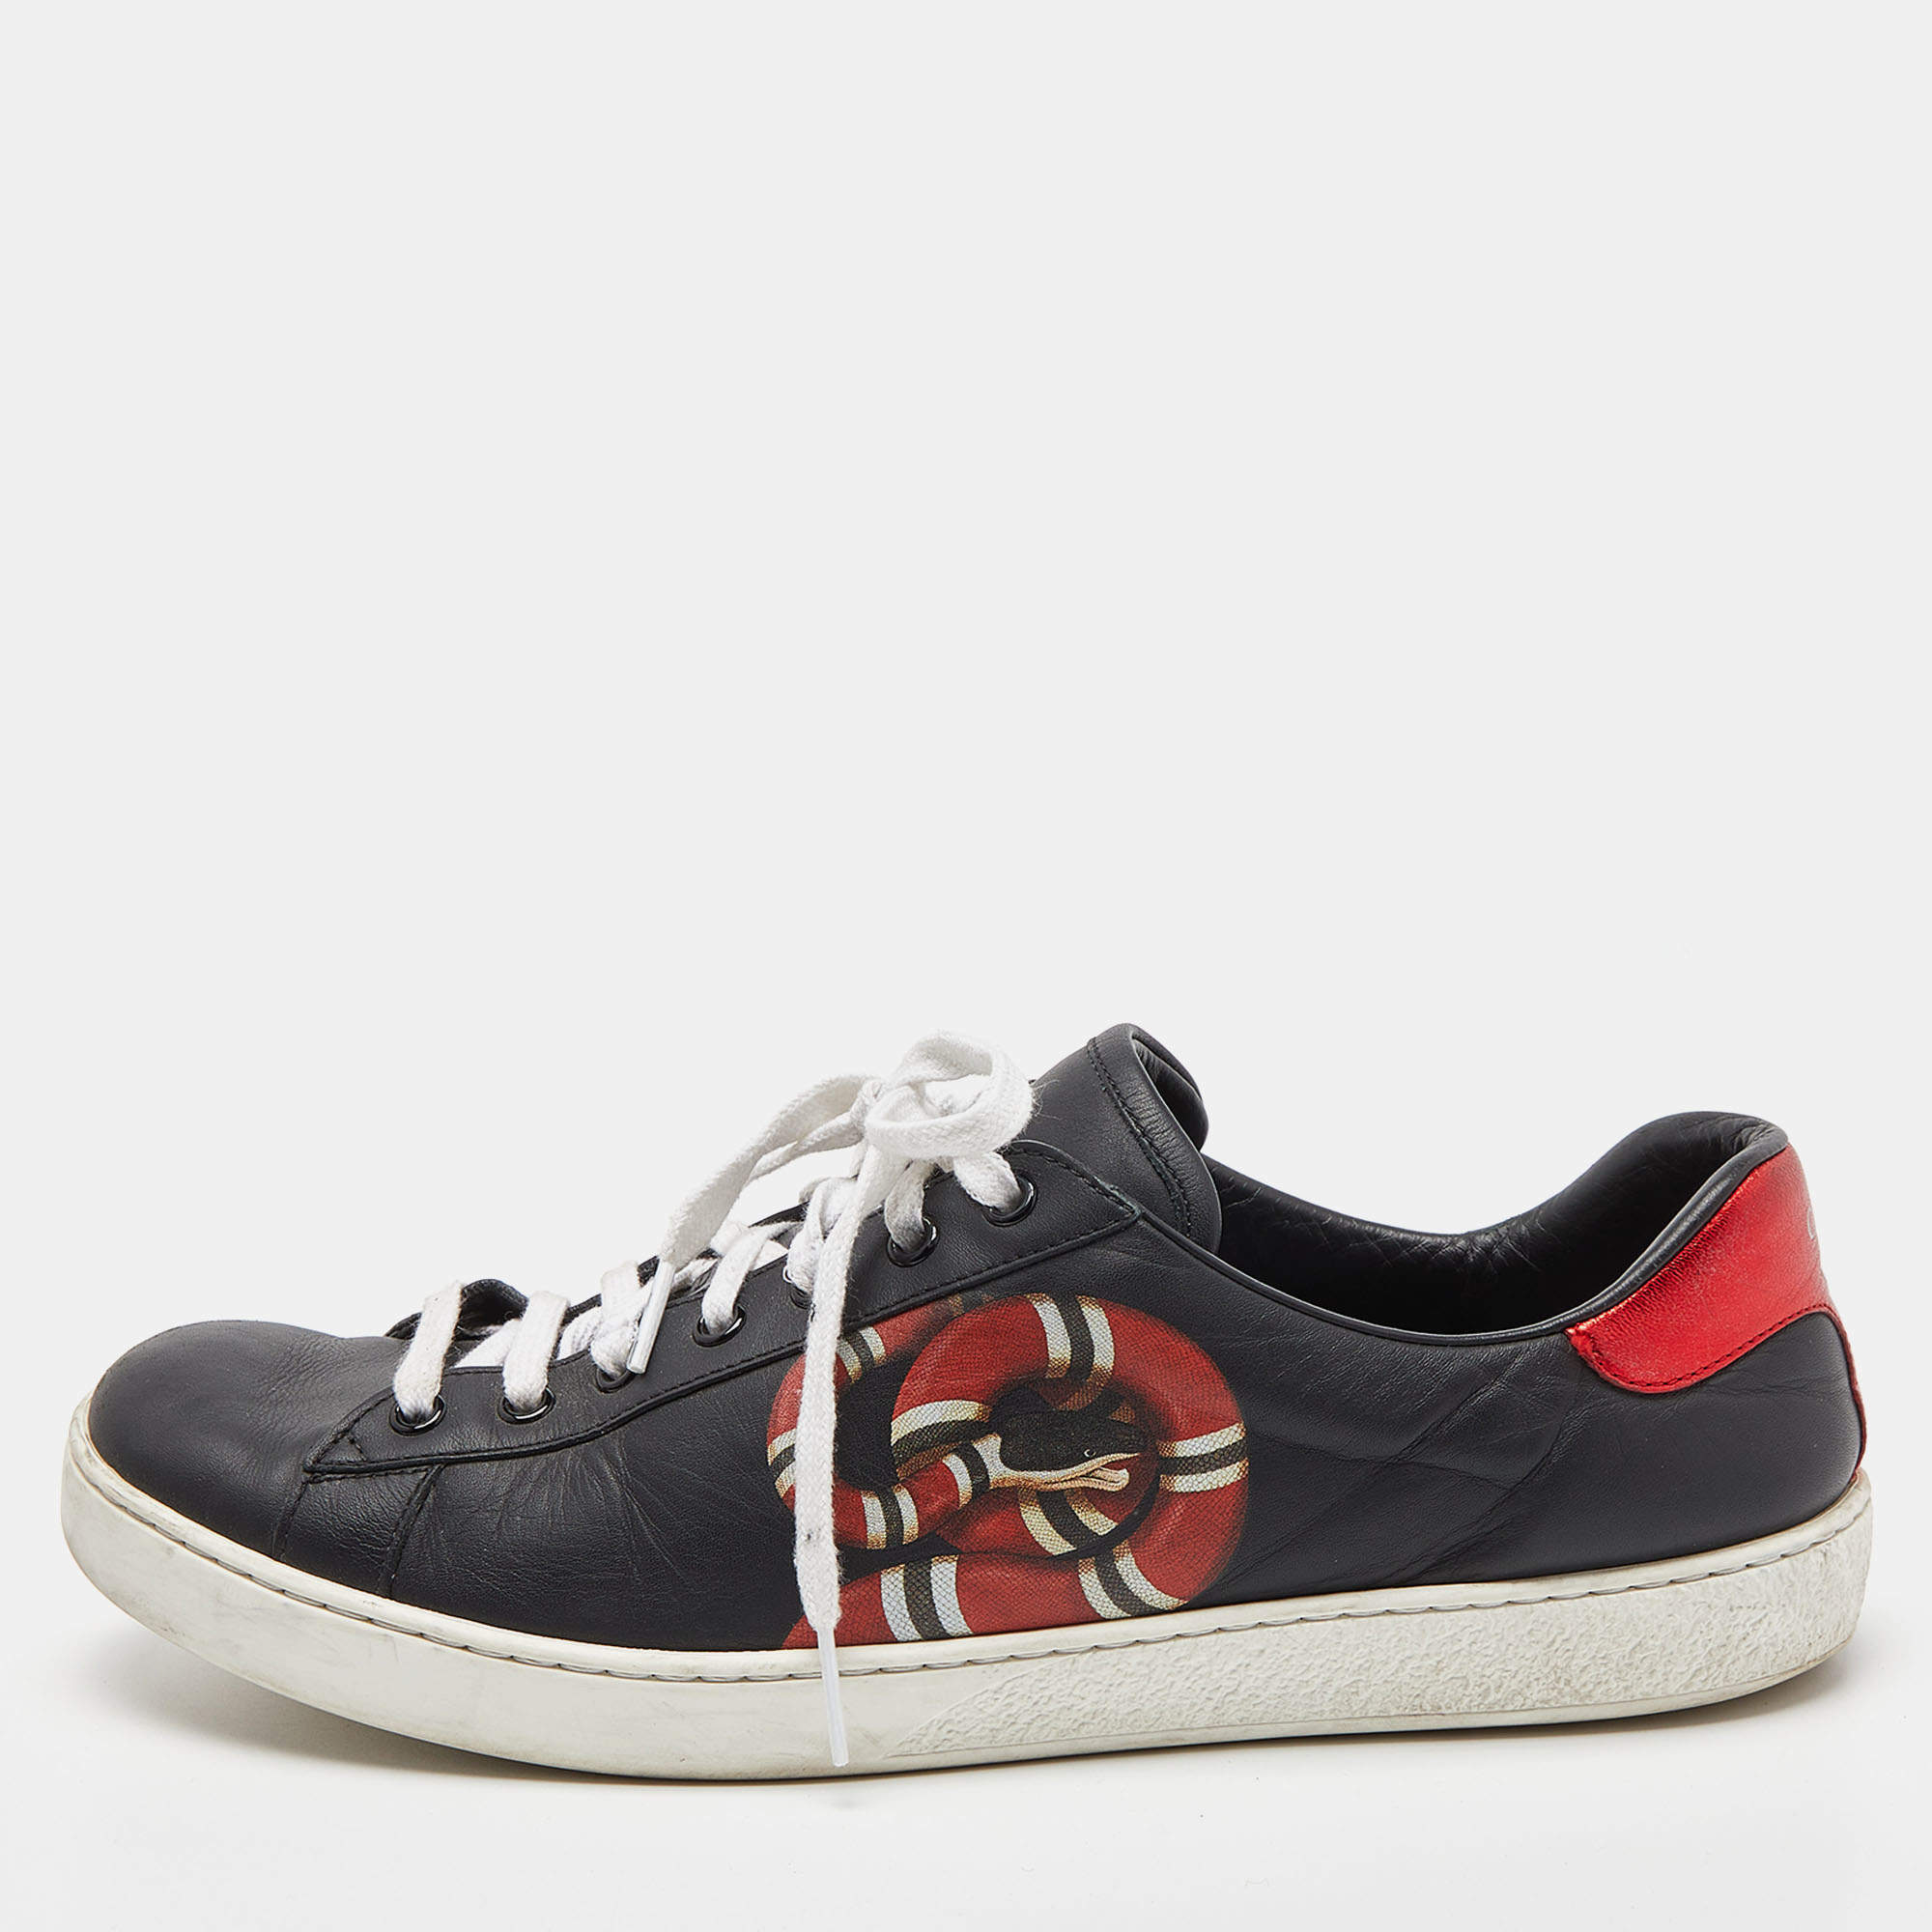 Gucci Black Leather Print Ace Sneakers 44 Gucci |